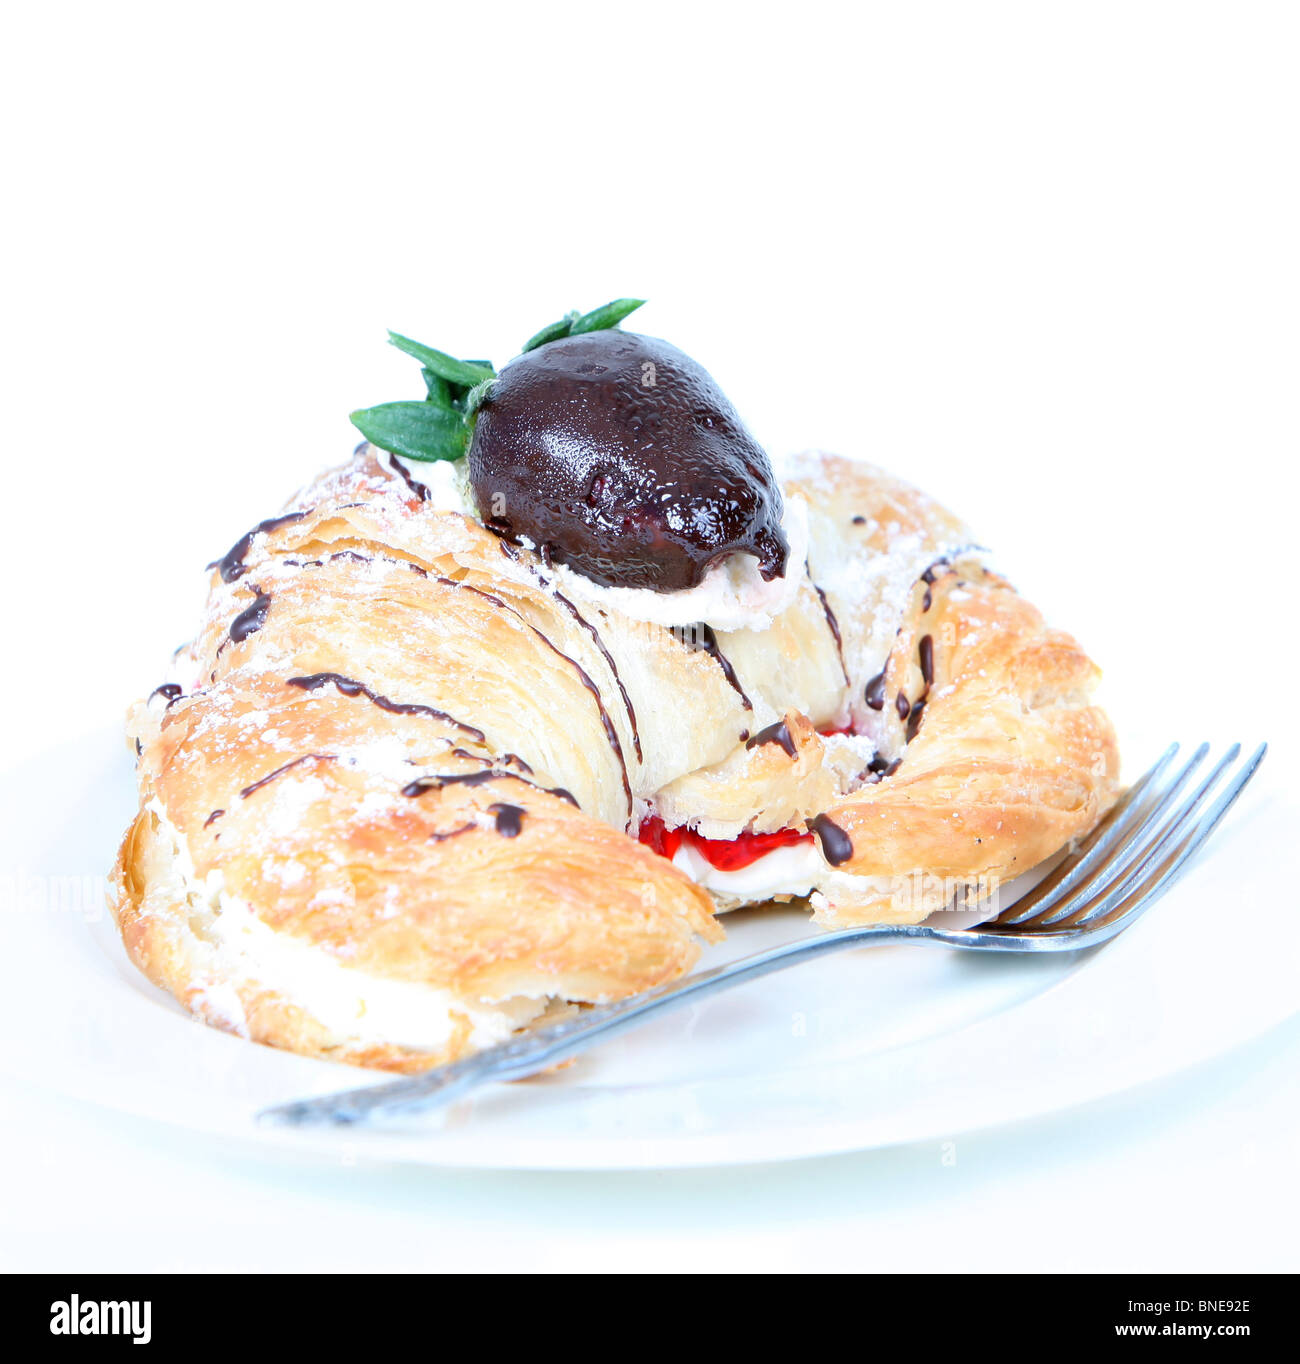 Cream filled croissant with chocolate strawberry Stock Photo